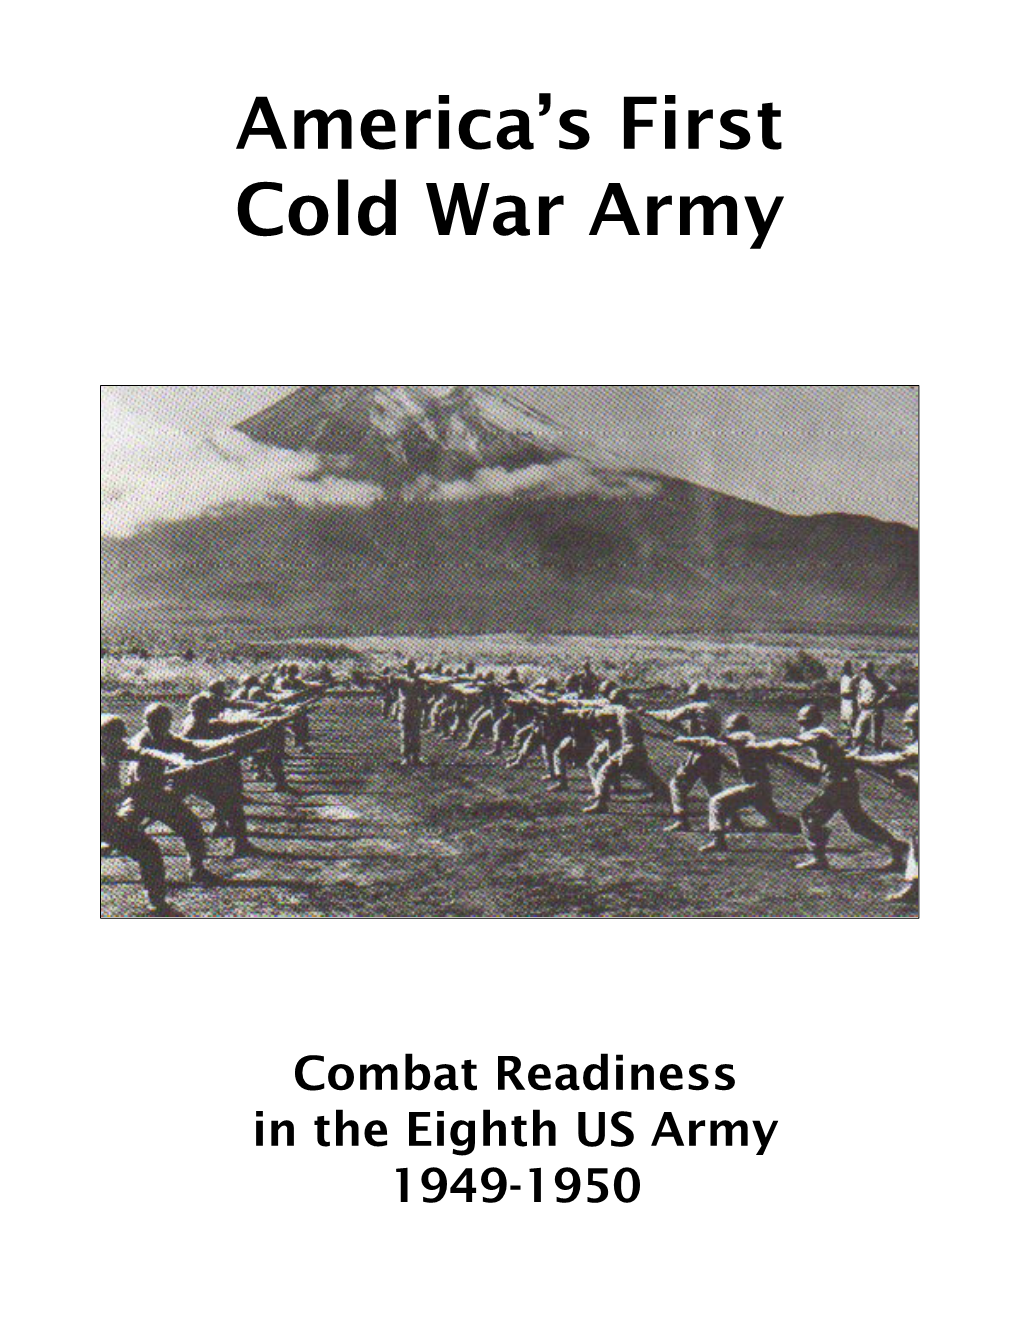 America's First Cold War Army